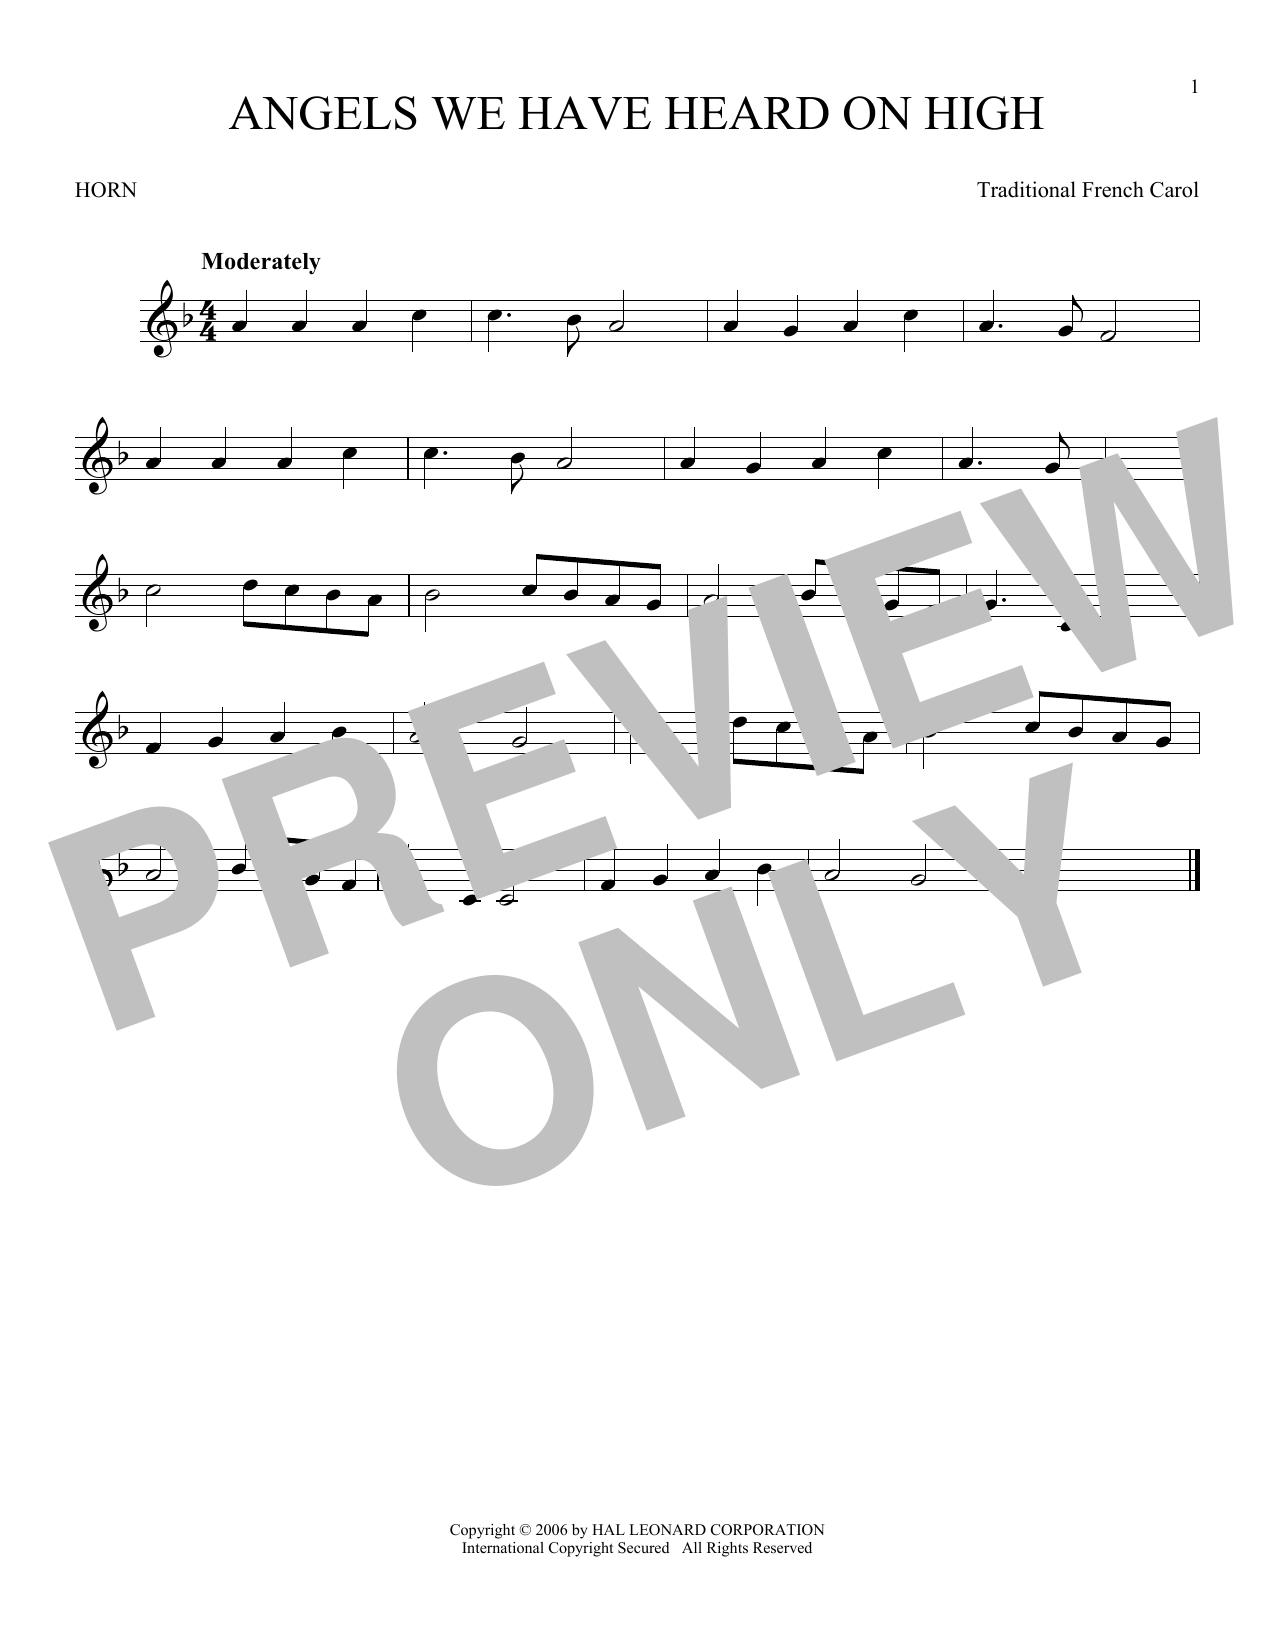 Download Traditional French Carol Angels We Have Heard On High Sheet Music